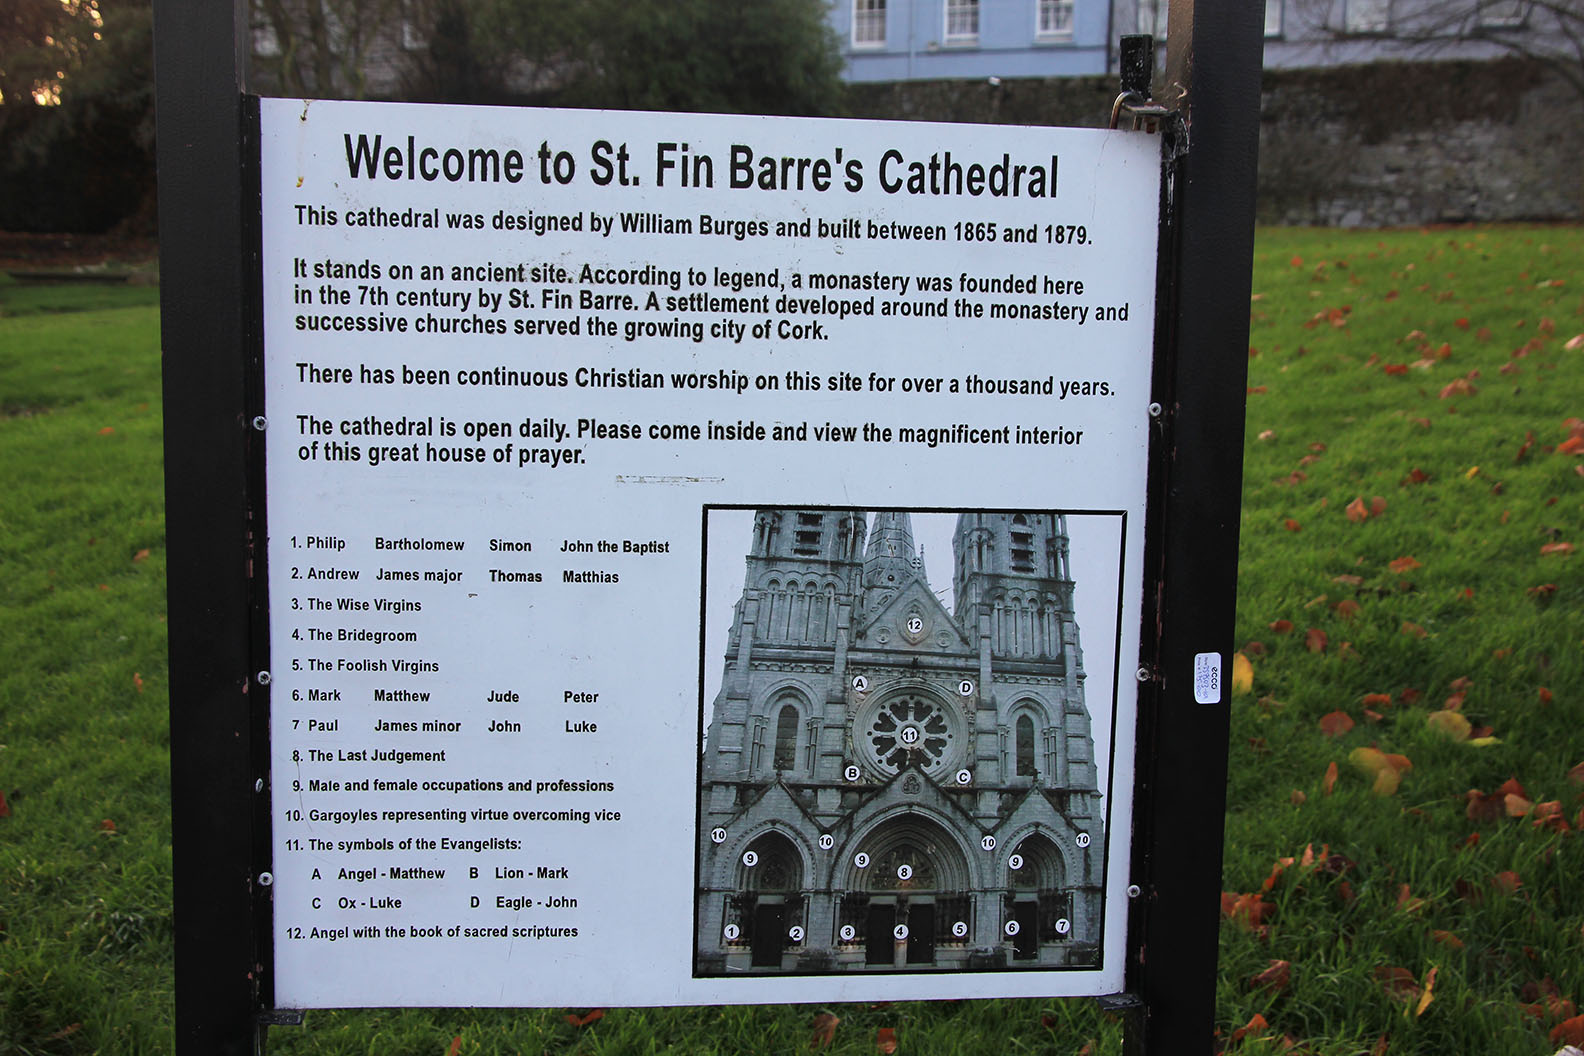 Cathedral sign. According to legend, a monastery was founded at the site of the cathedral in the 7th century by St. Fin Barre.